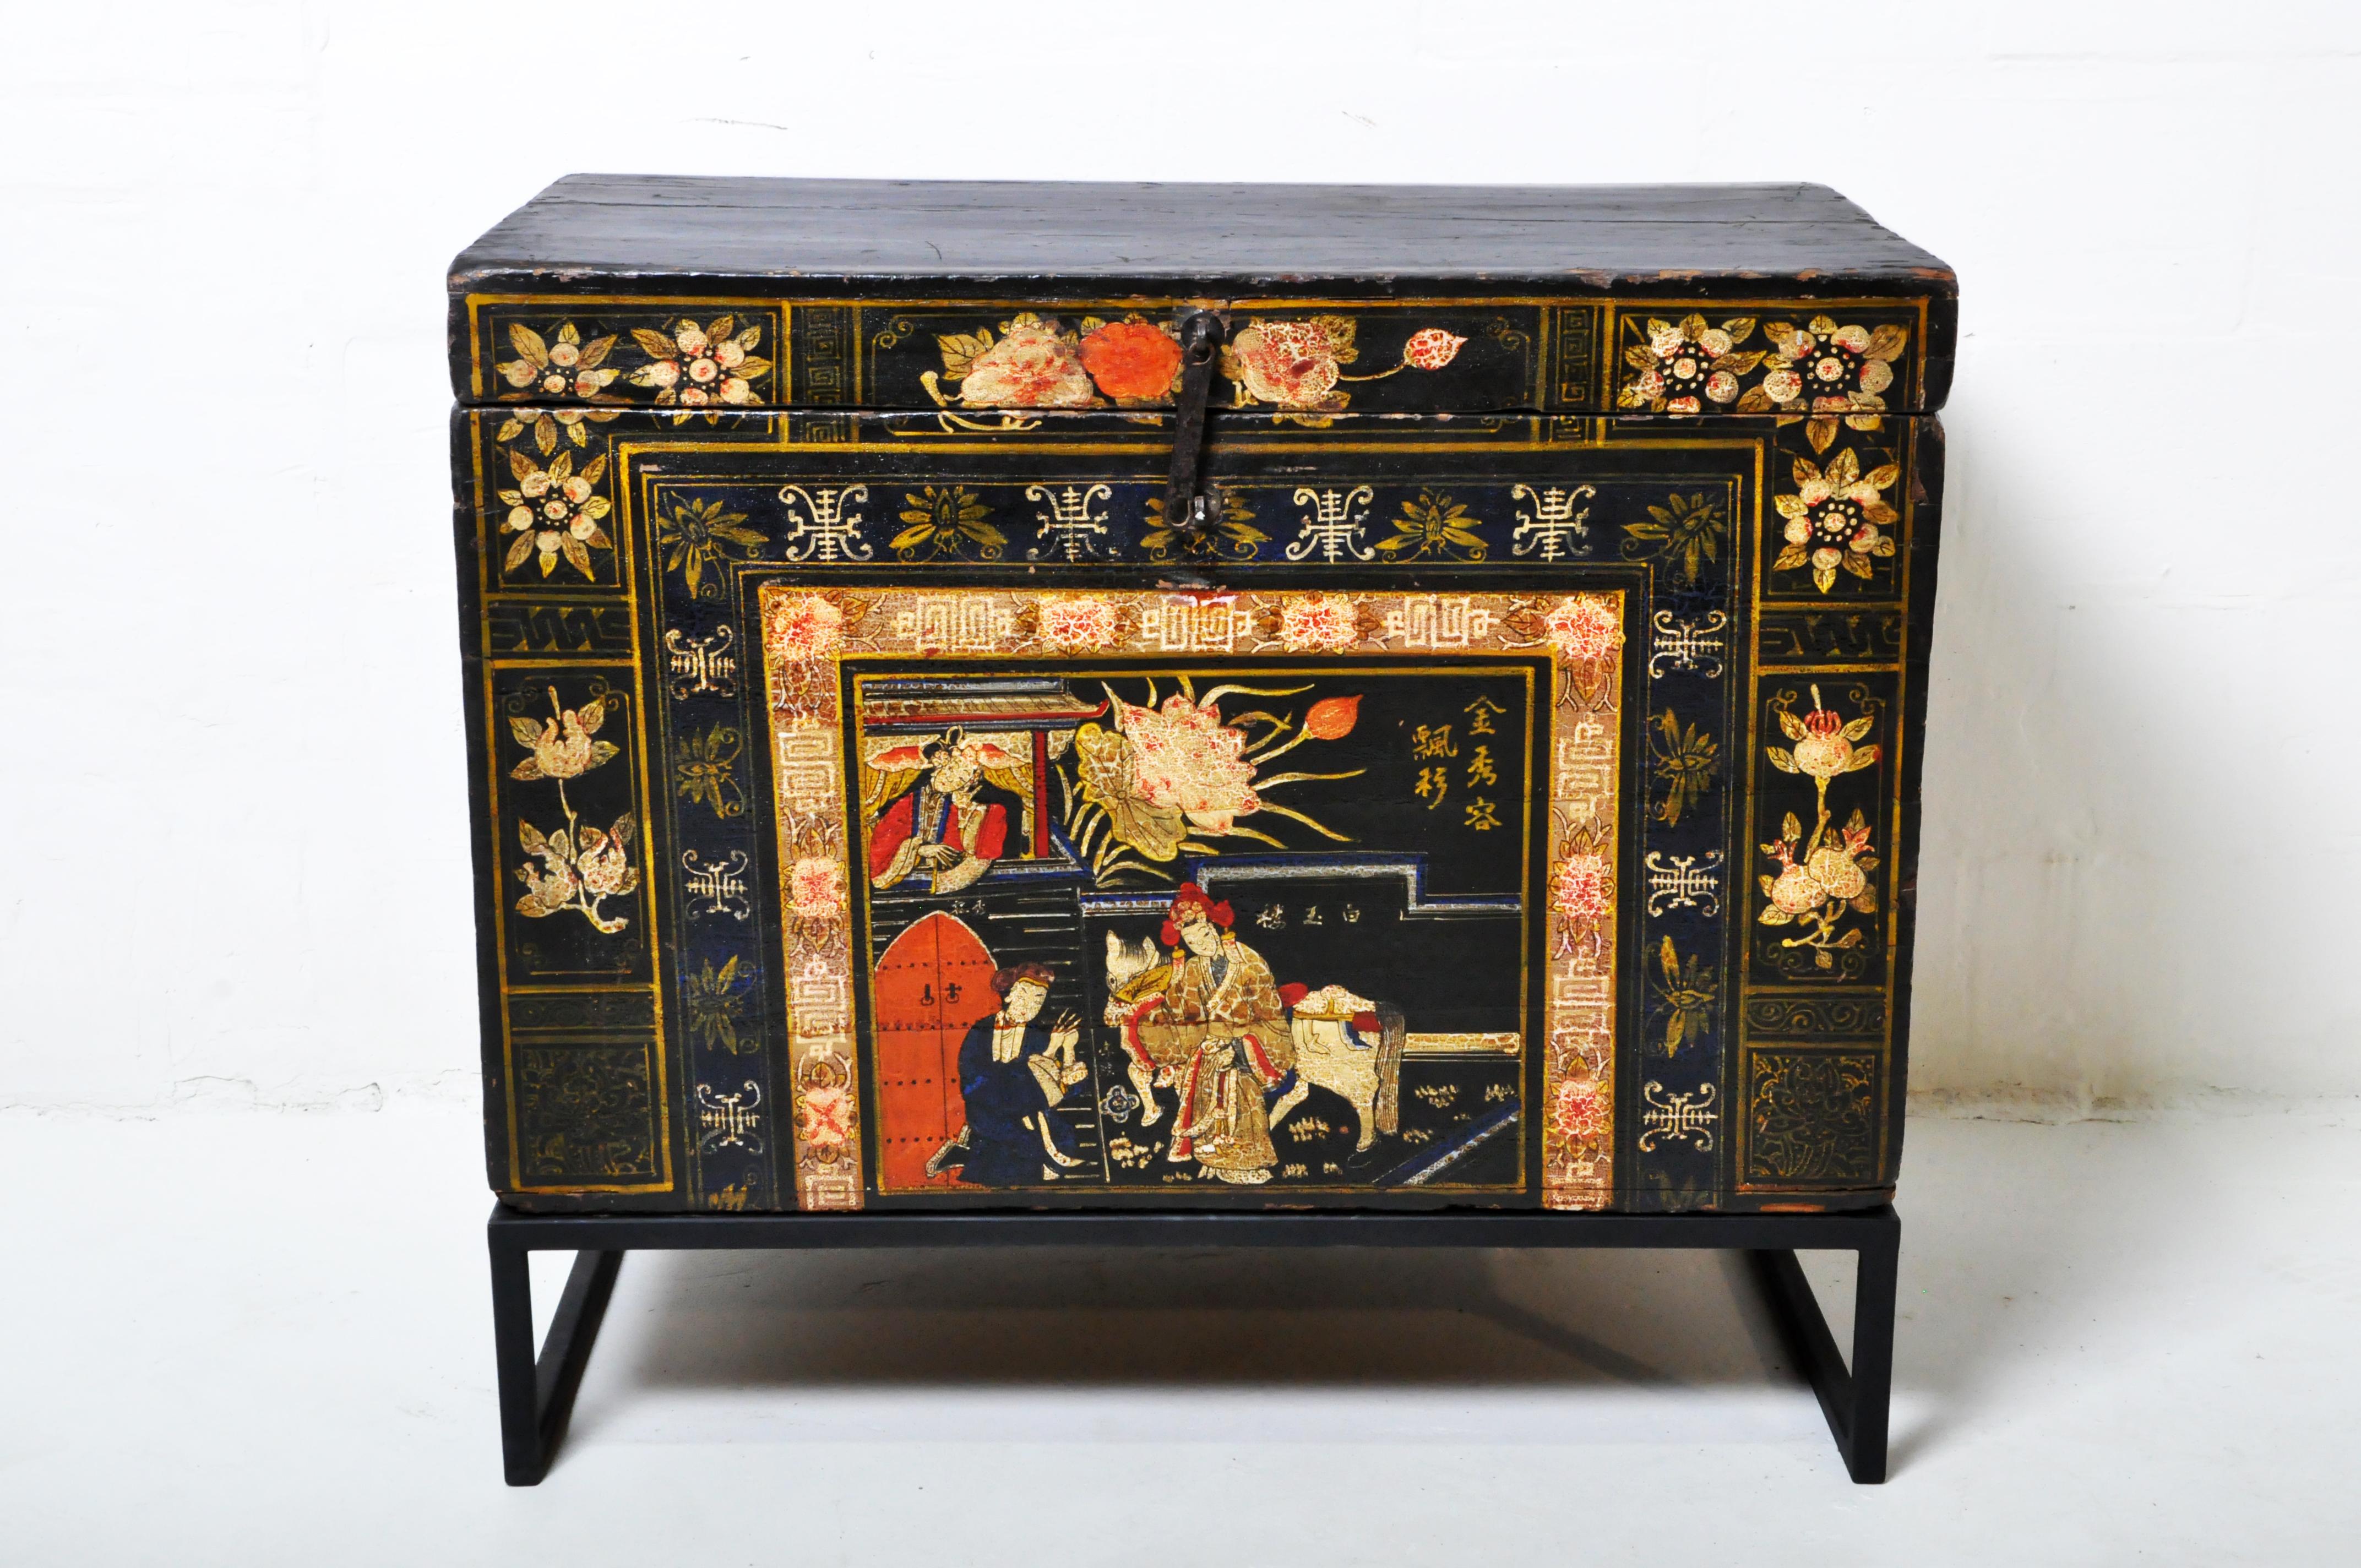 Chinese-Mongolian style wedding chest chest with colorful painting and original patina. The chest was originally used to store blankets. It's raised on a custom metal stand.